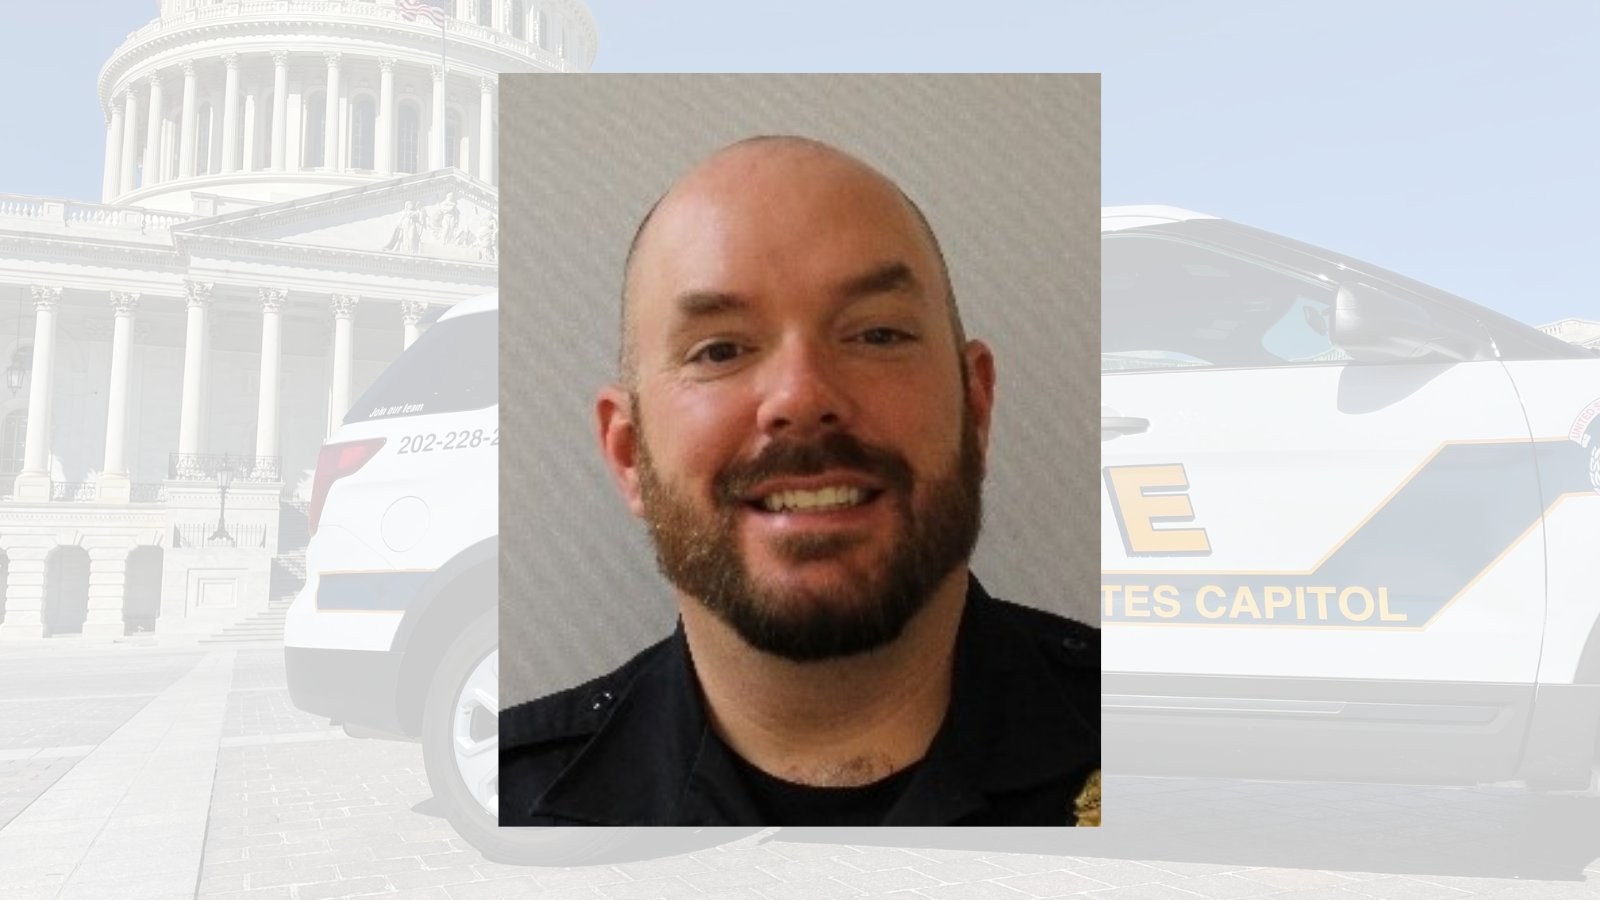 William Evans Identified as Capitol Police Officer Killed by Suspect Who Rammed Car Into Him